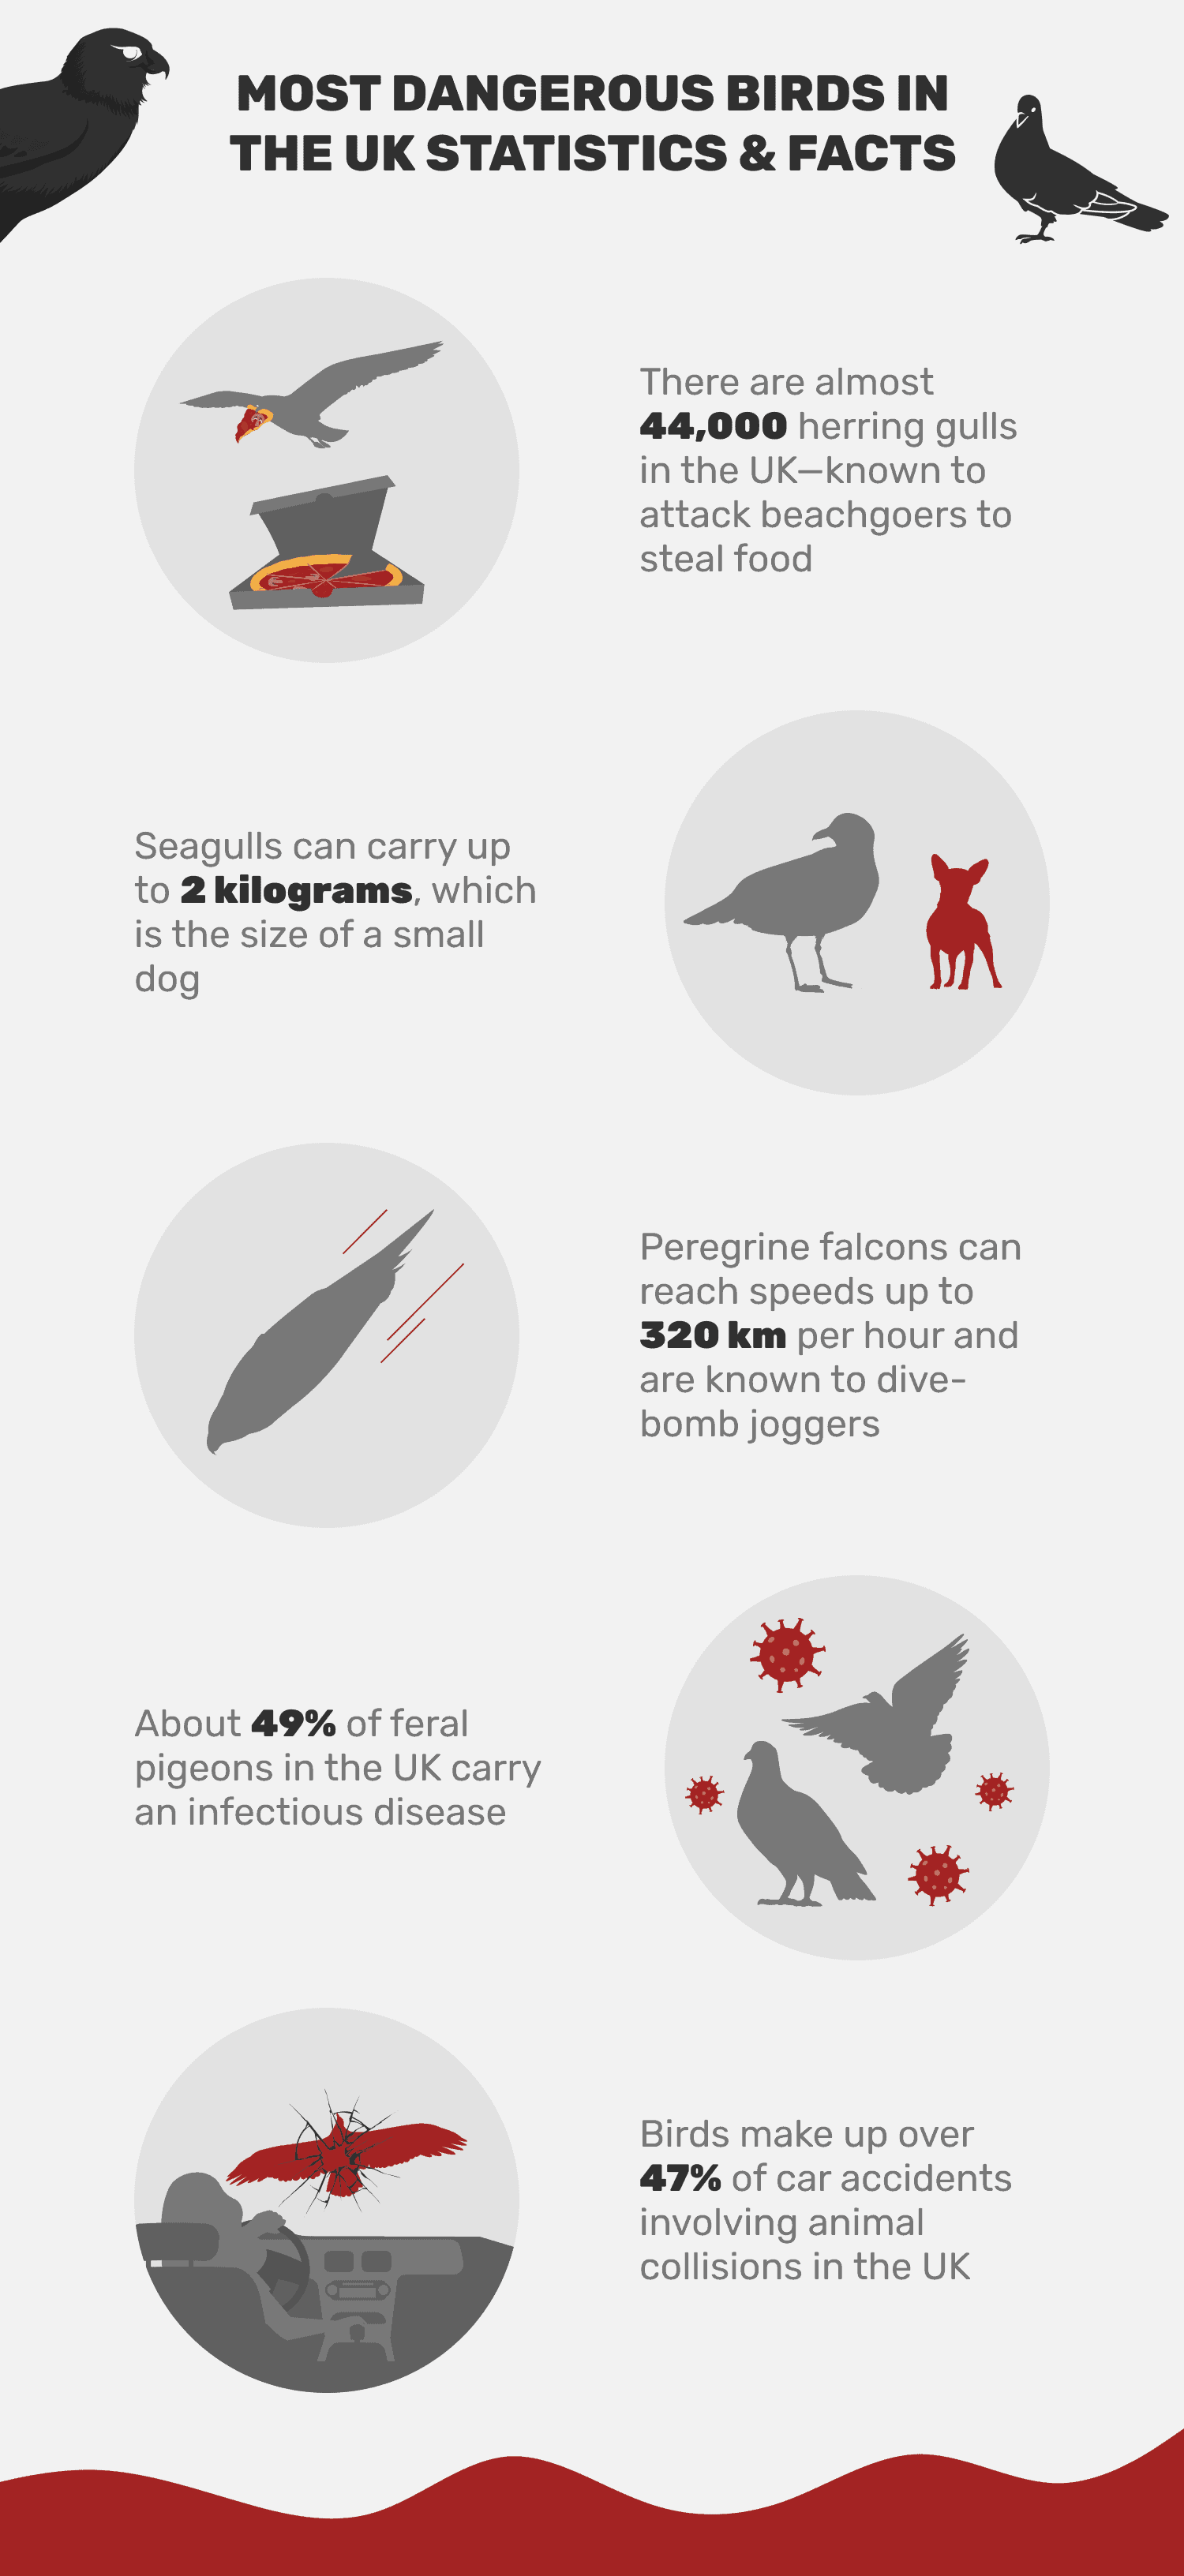 MOST_DANGEROUS_BIRDS_IN_THE_UK_STATISTICS_&_FACTS (1)